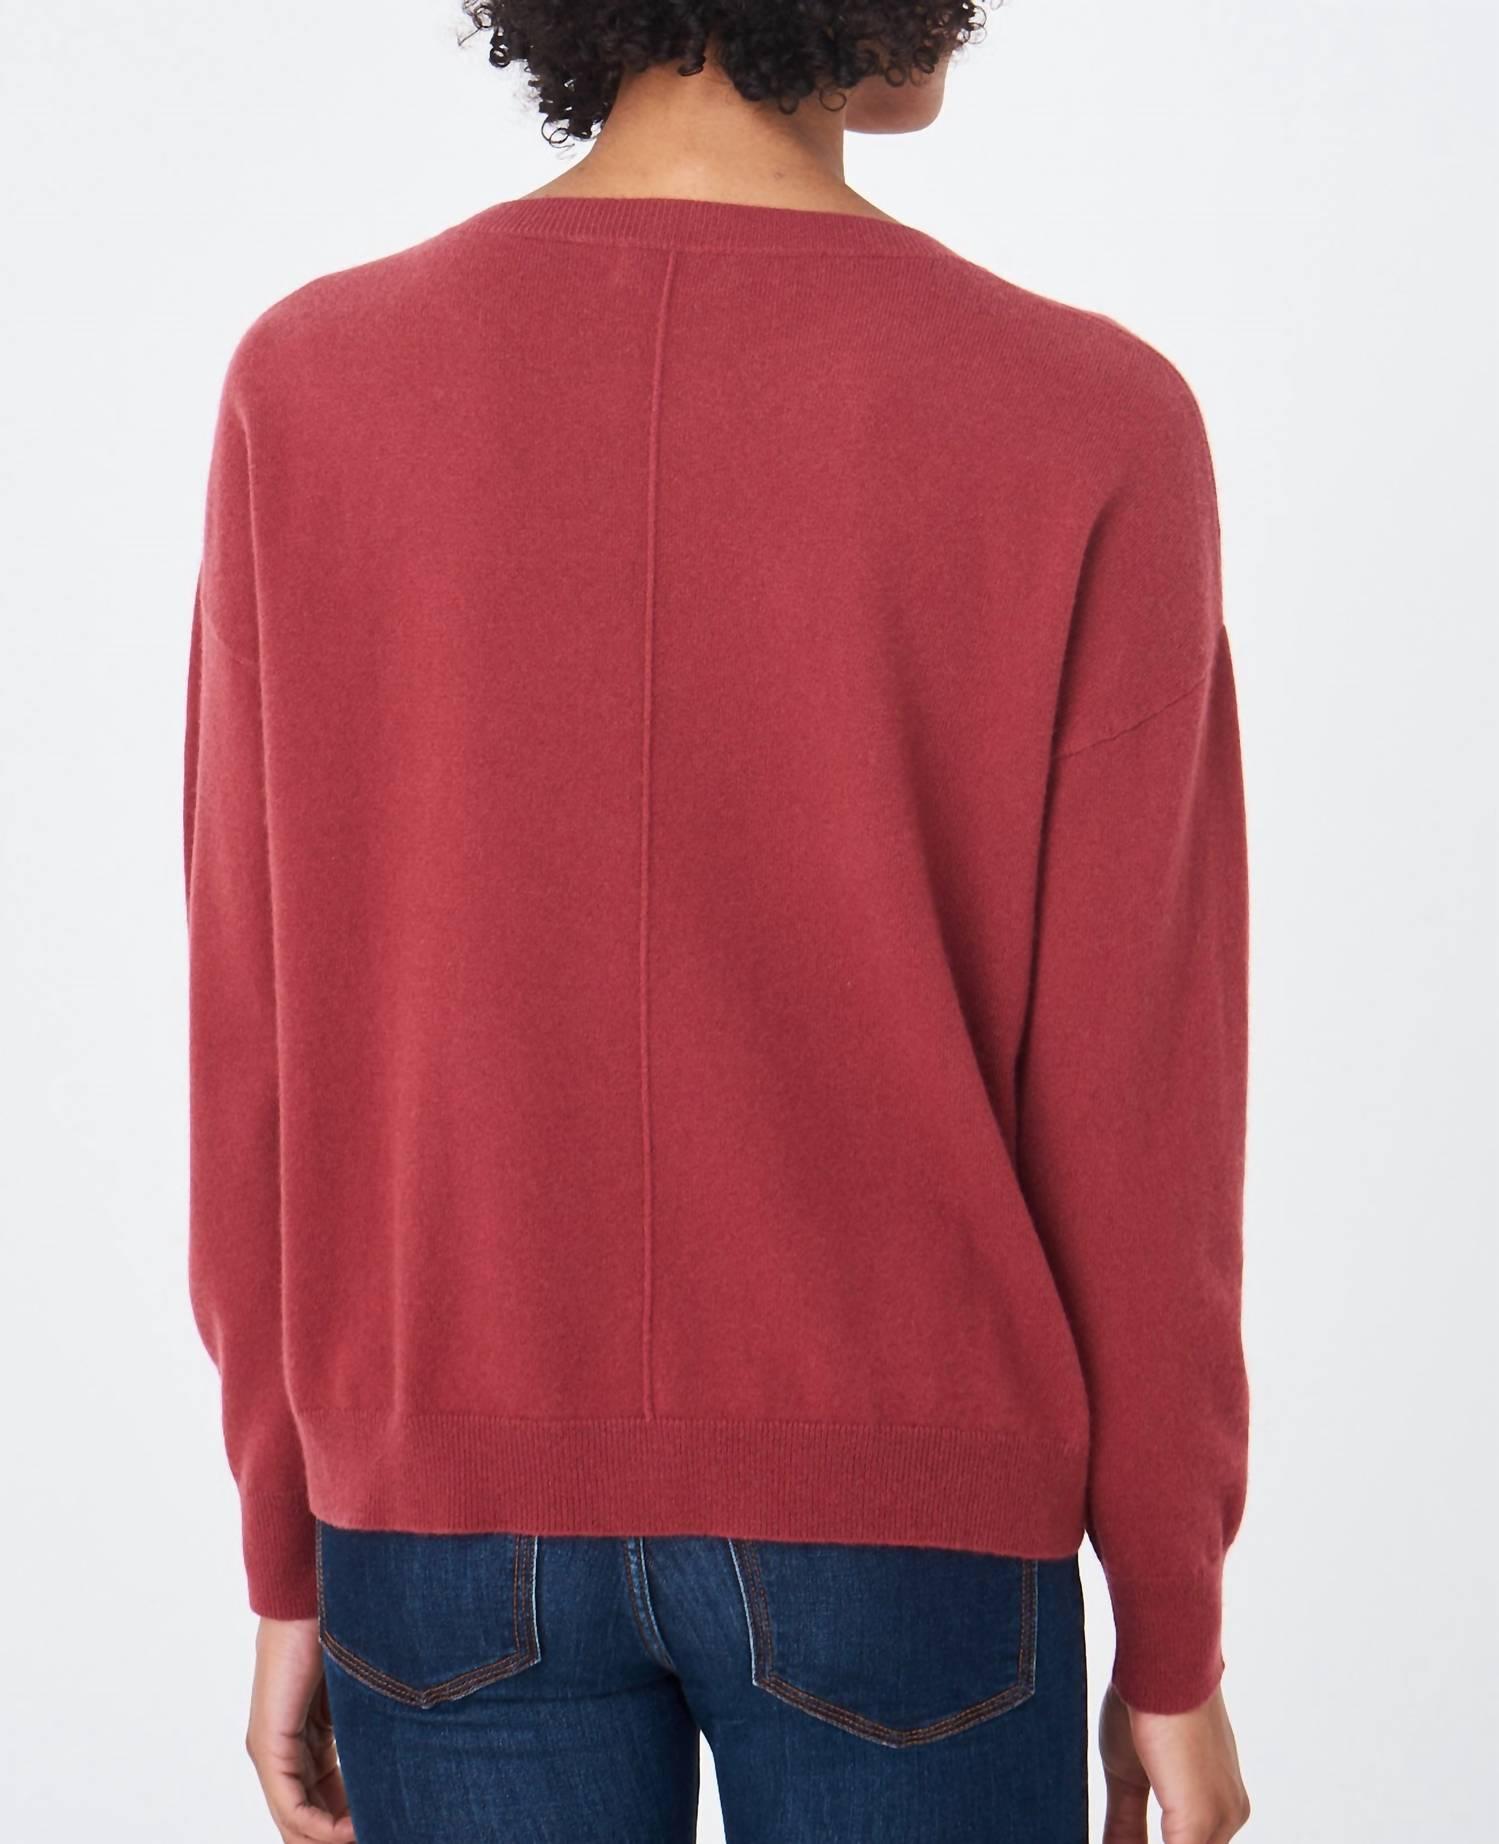 Repeat Cashmere Fine Knitted Cashmere Sweater in Red | Lyst